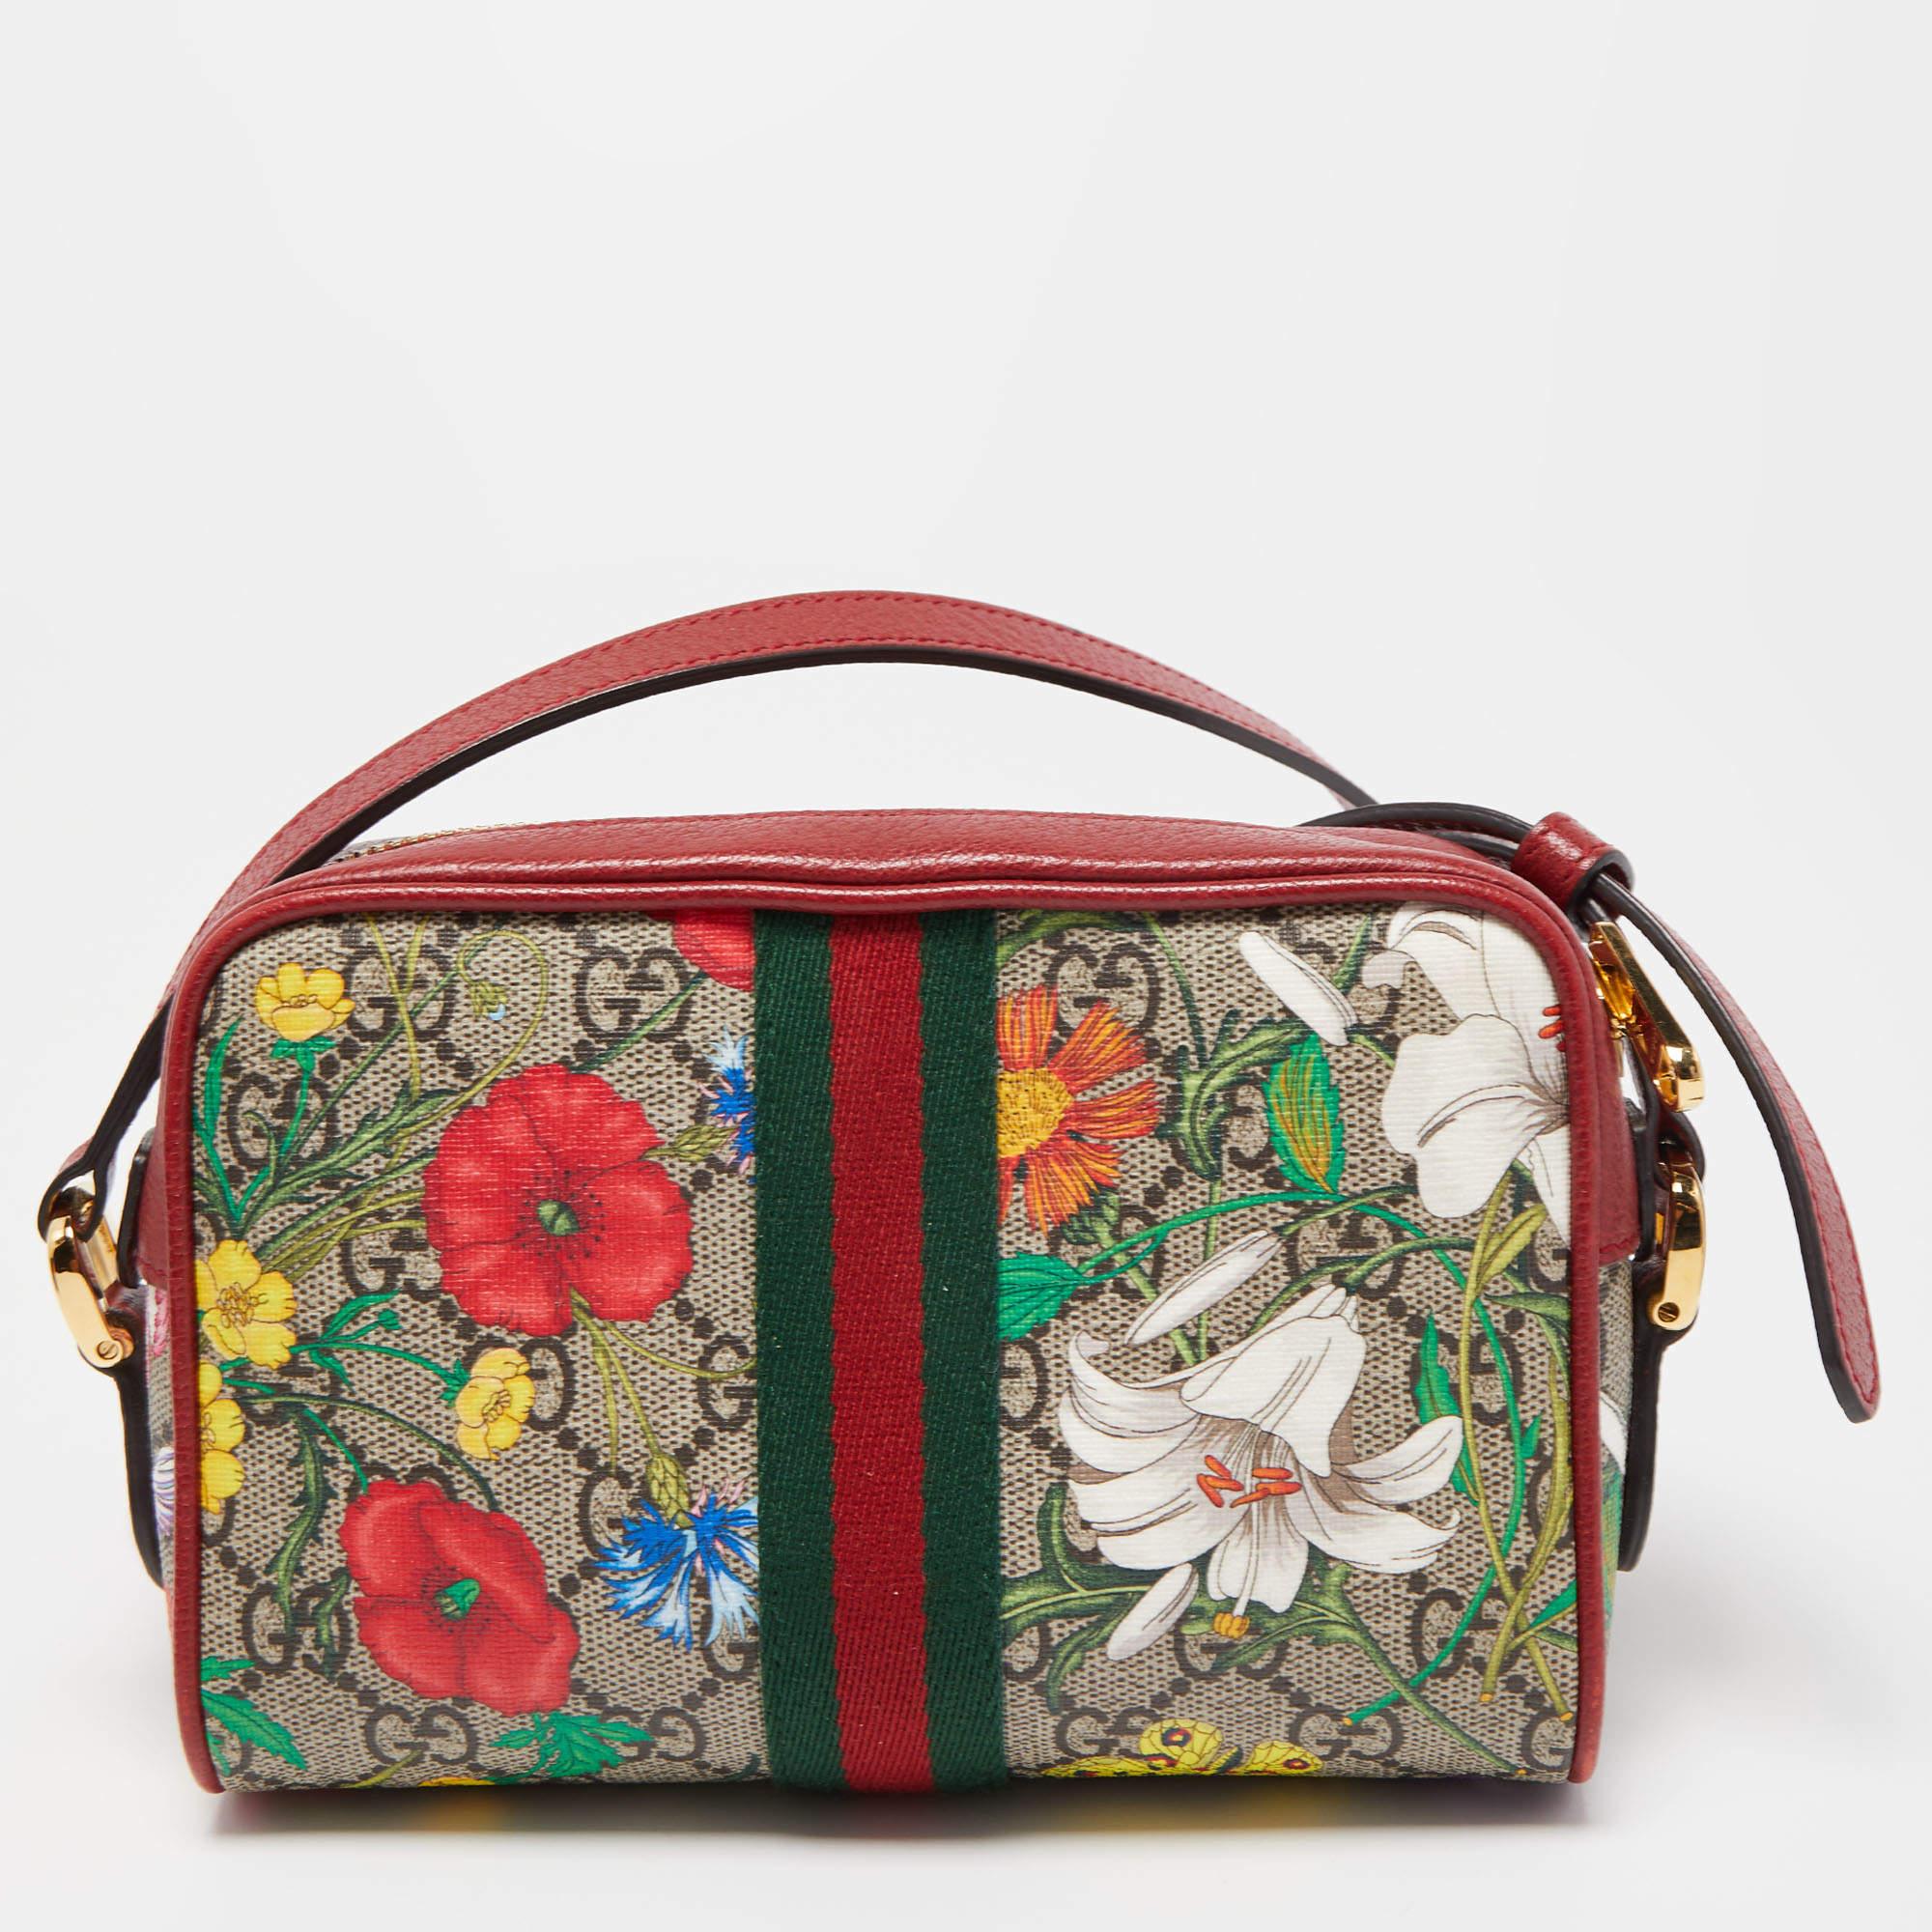 The Gucci Ophidia crossbody bag is a compact yet stylish accessory. It features the iconic GG Supreme monogram canvas with a floral pattern, a red leather trim, and a long strap for versatile wear. This bag effortlessly blends luxury and